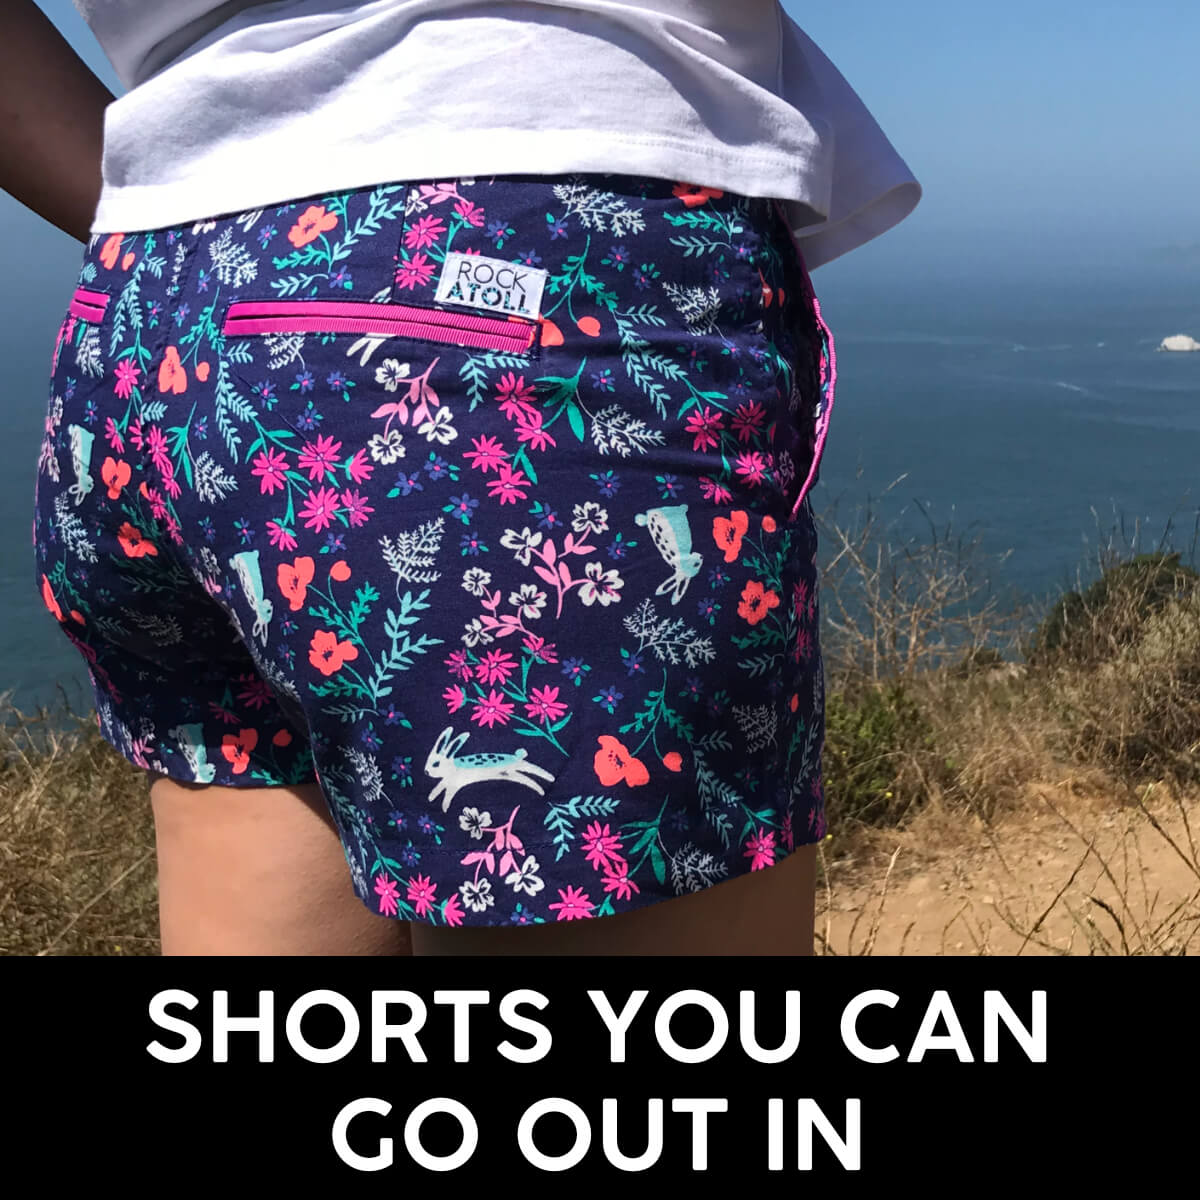 Shorts That Are As Ready For the Summer As You Are! Colorful Patterned Floral Animal Print Shorts for Women. Super Cute Chino Shorts for Ladies!